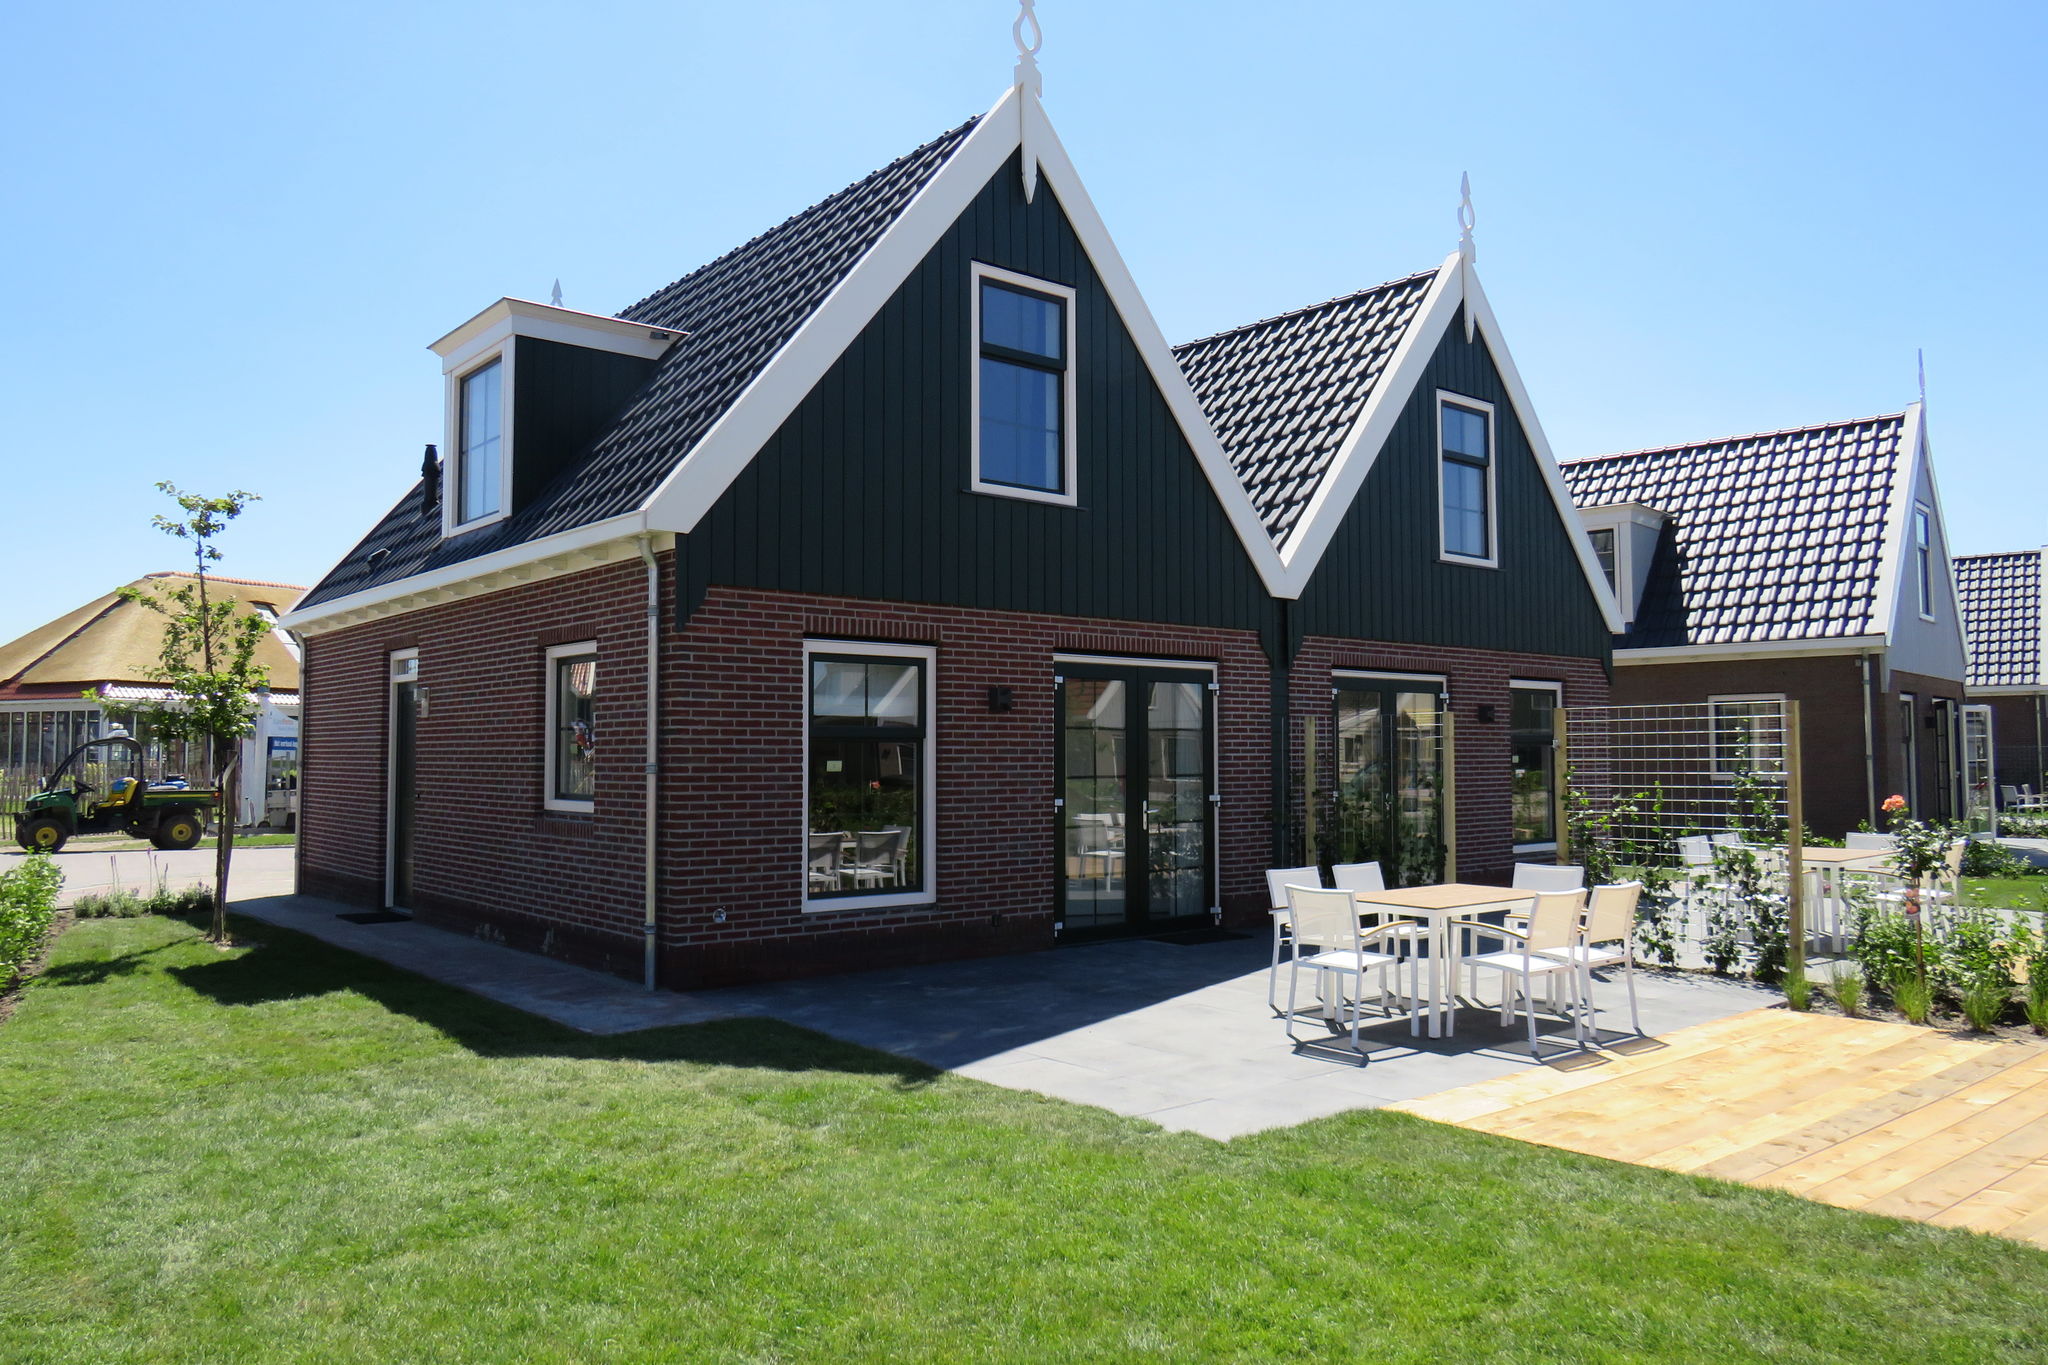 Detached holiday home near Amsterdam